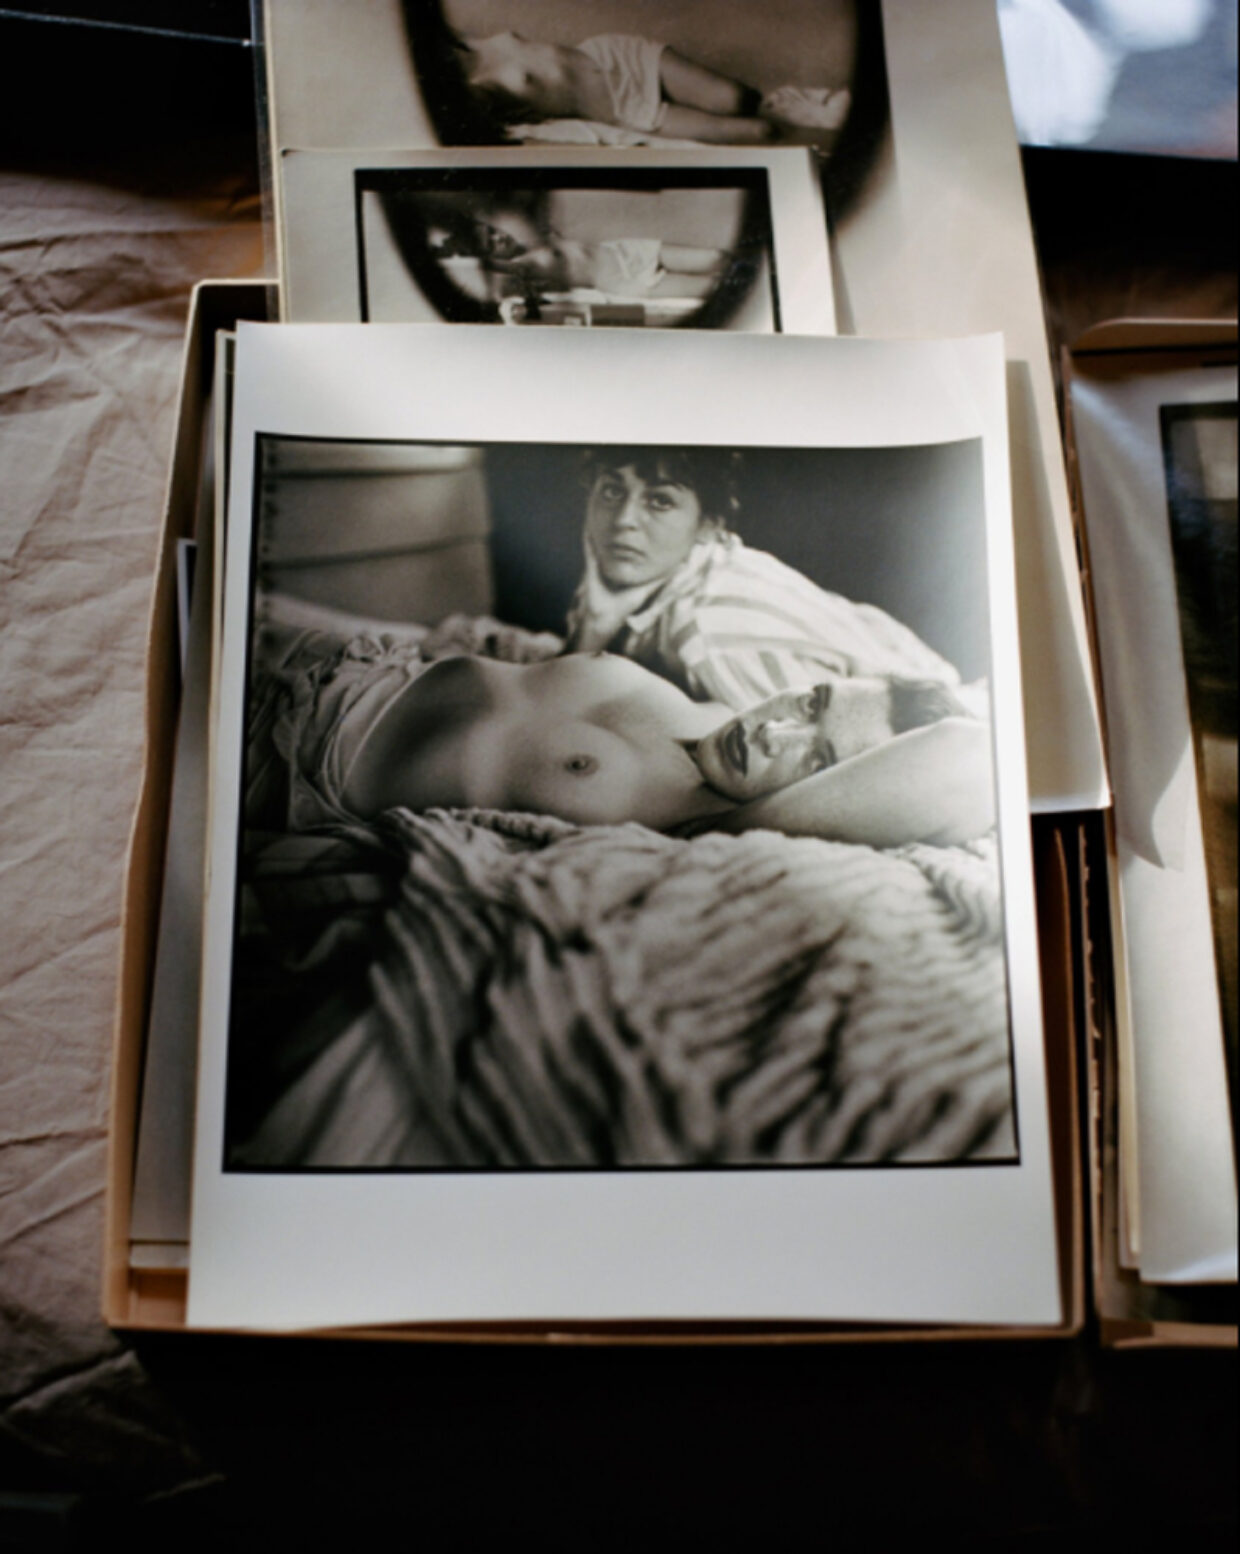 Saul Leiter by François Halard: Where an Iconic East Village Photographer Lived | 3